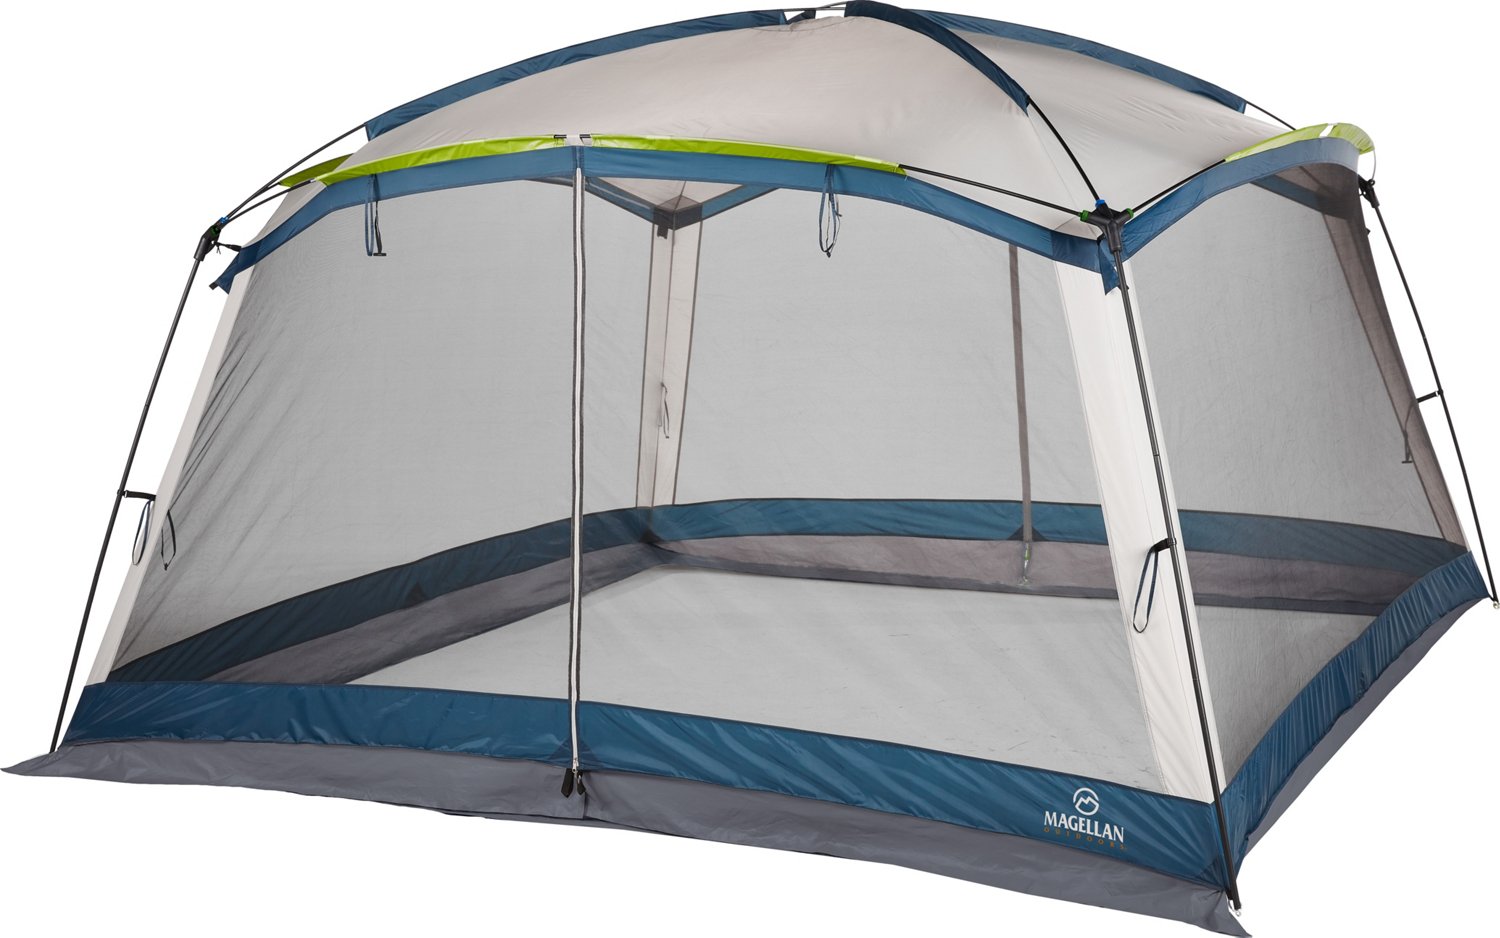 Camping Tents for Sale | Academy